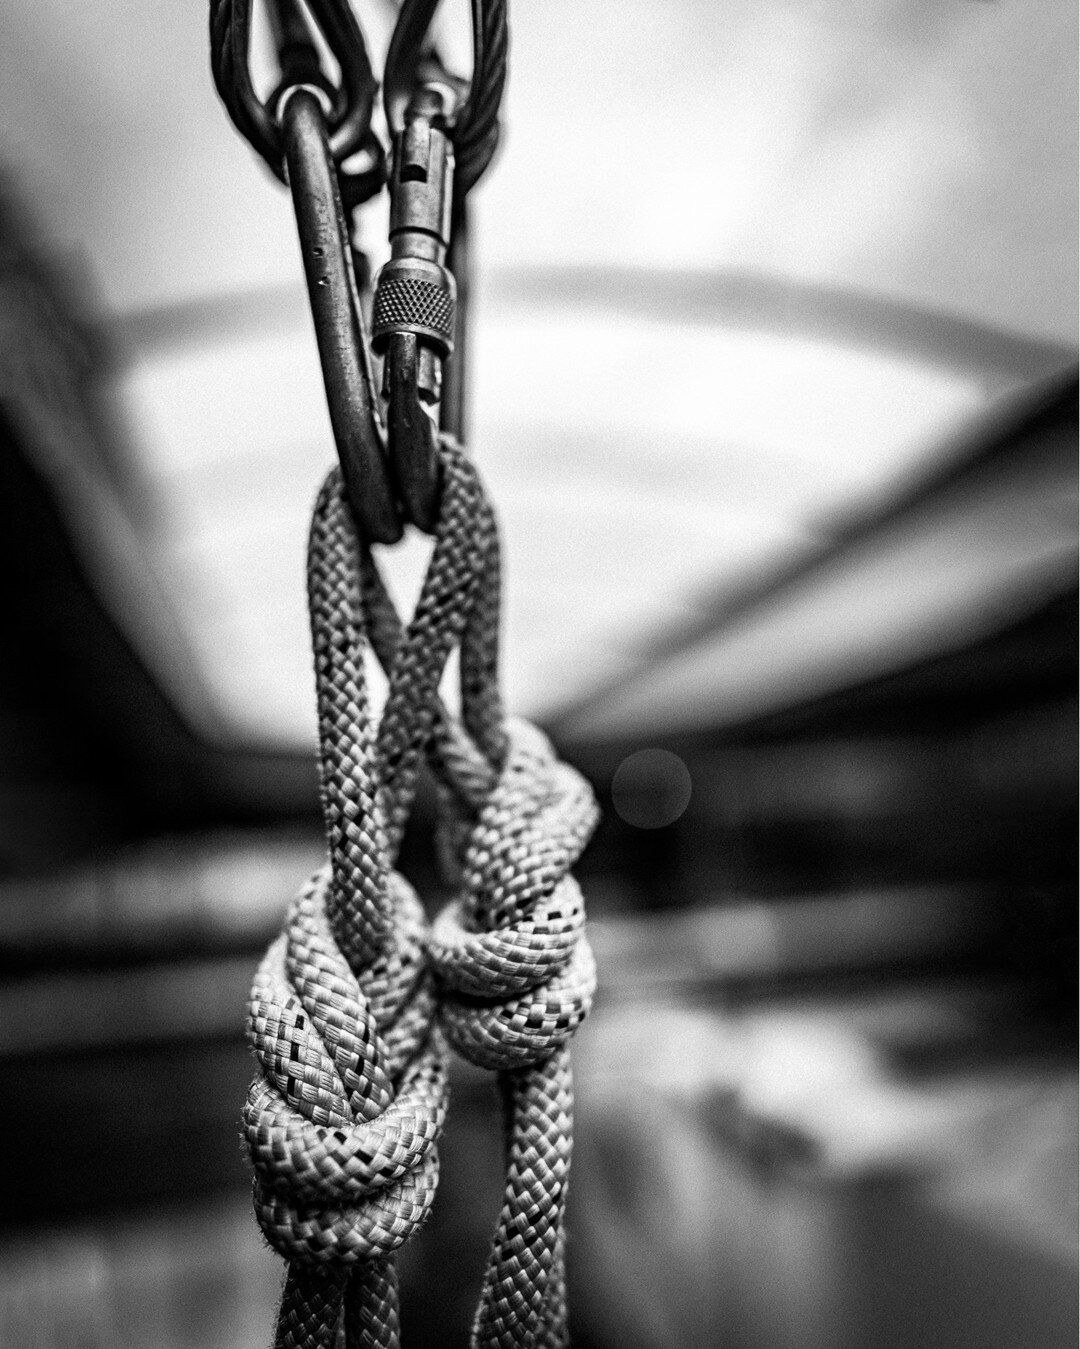 Simplicity
Great thought is the amount of hours someone has spent suspended high above the ground on some bits of steel and a rope twisted around itself. It's so simple and yet so strong if applied properly.

Shot on Sony A7RIII 24mm at F1.4

#photog